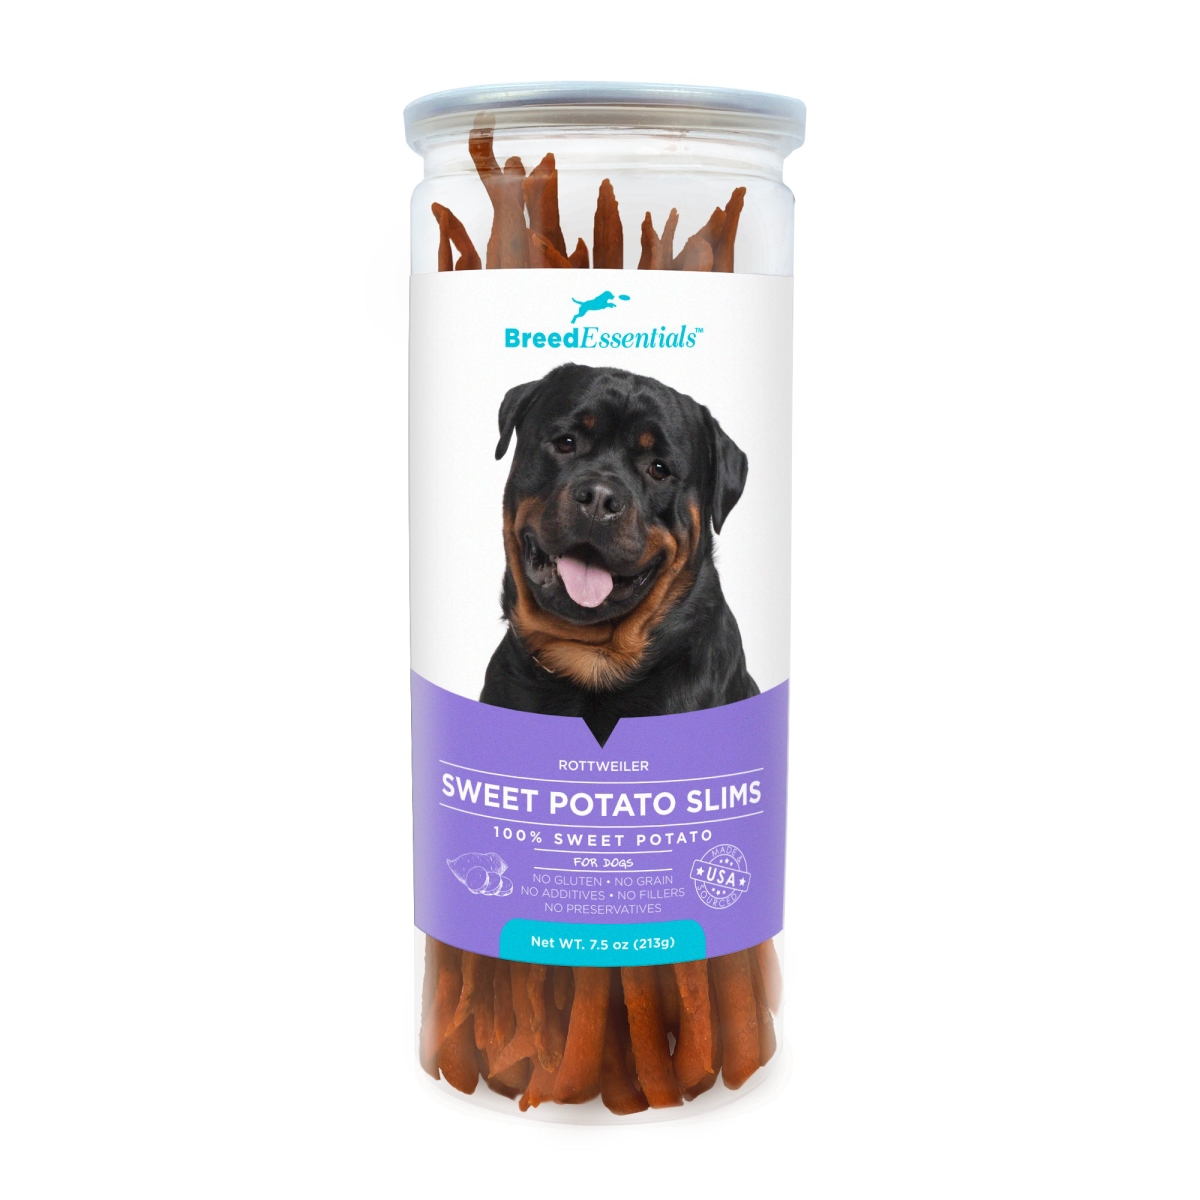 Picture of Breed Essentials 197247000457 7.5 oz Sweet Potato Slims - Rottweiler